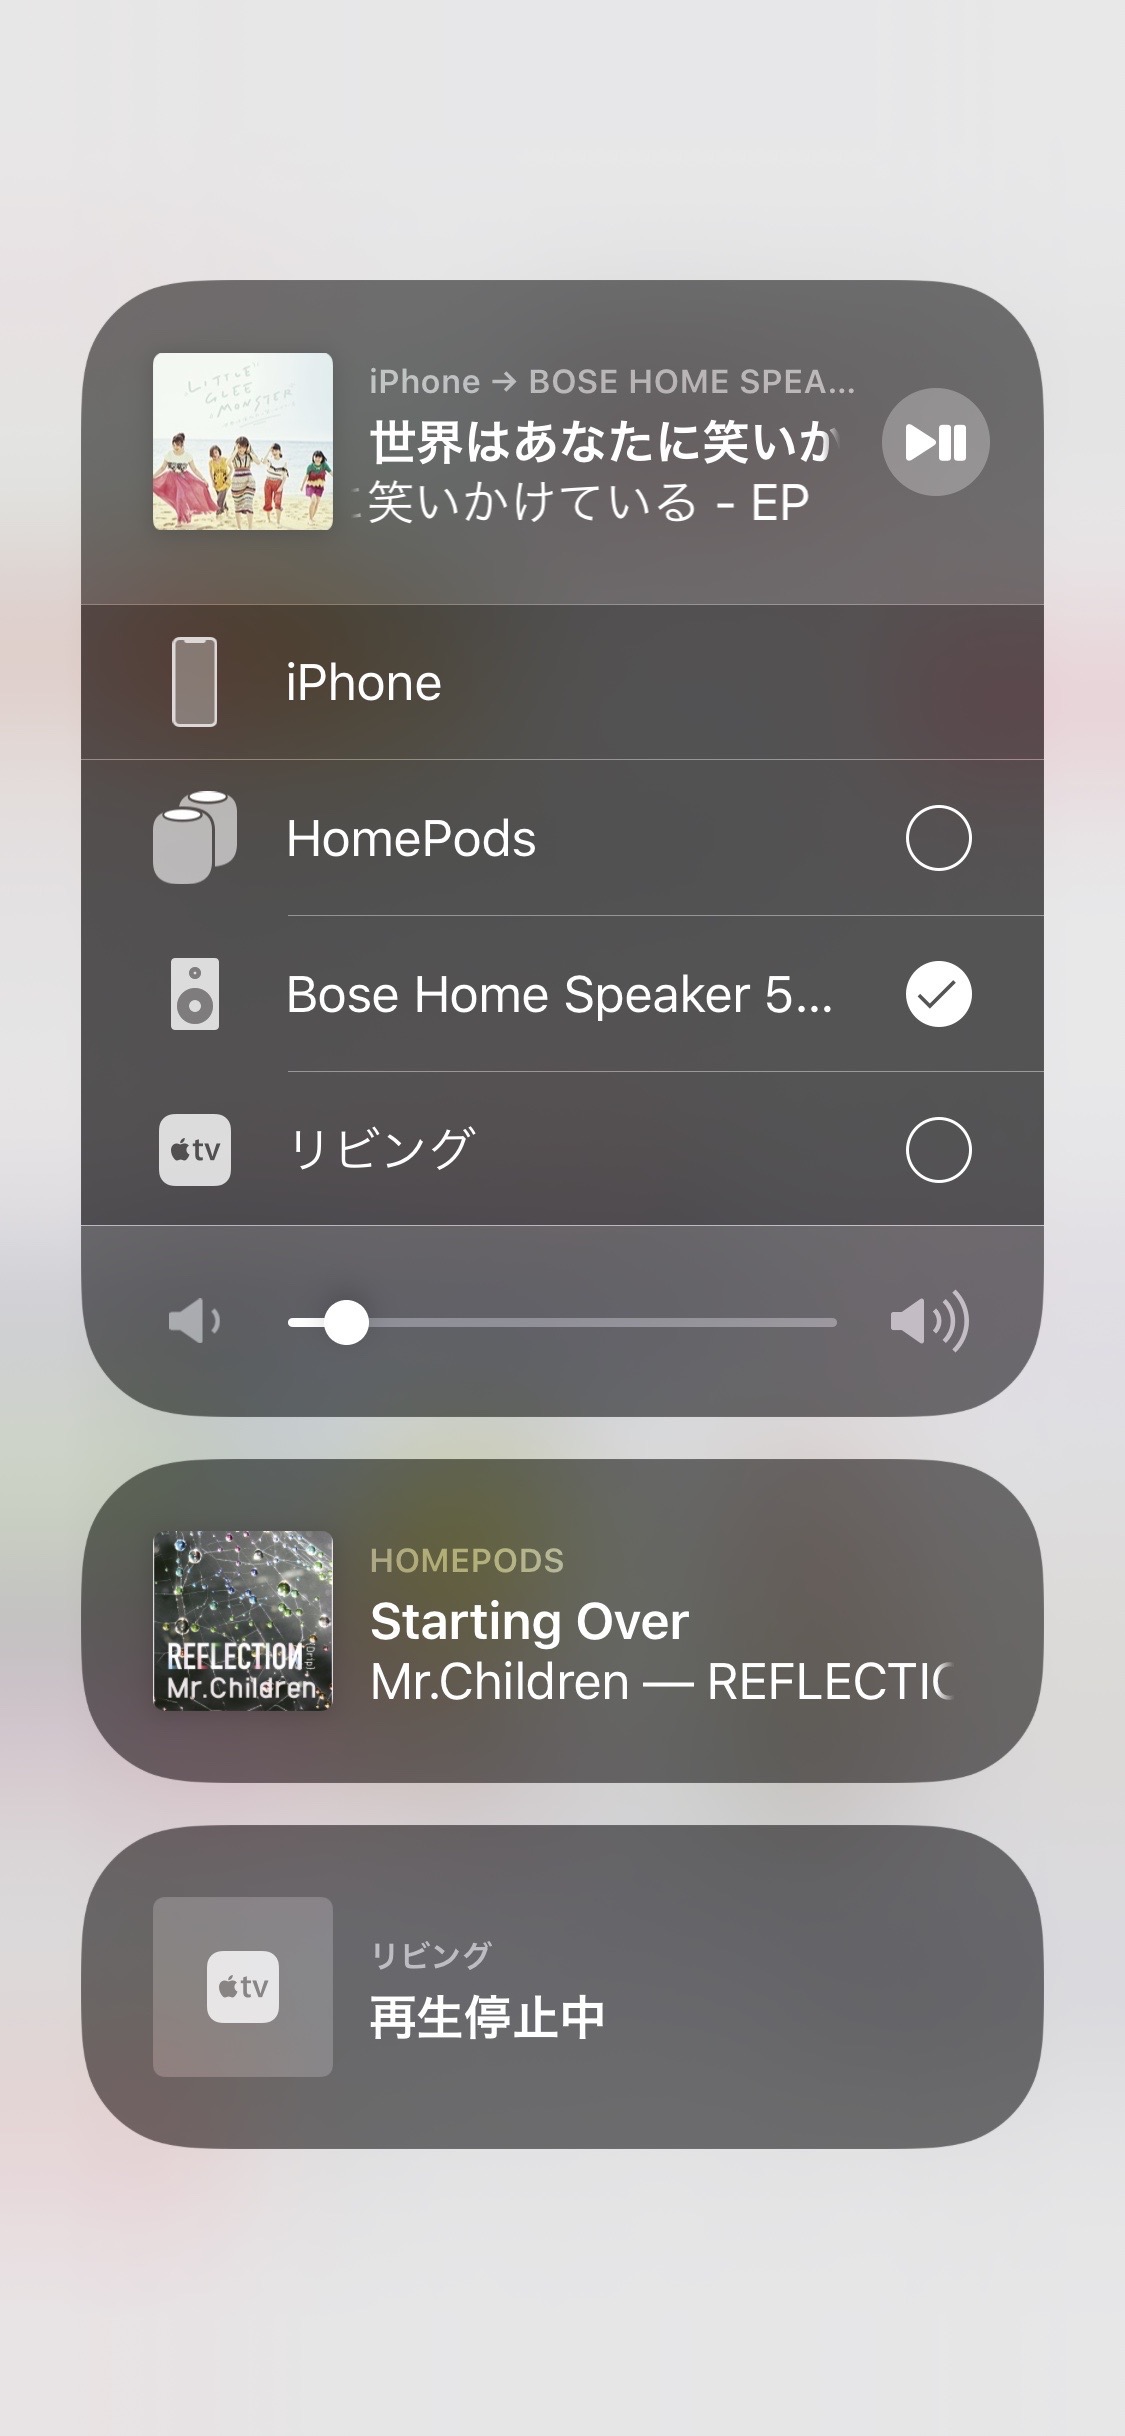 Finally AirPlay 2 on Bose Home Speaker 500